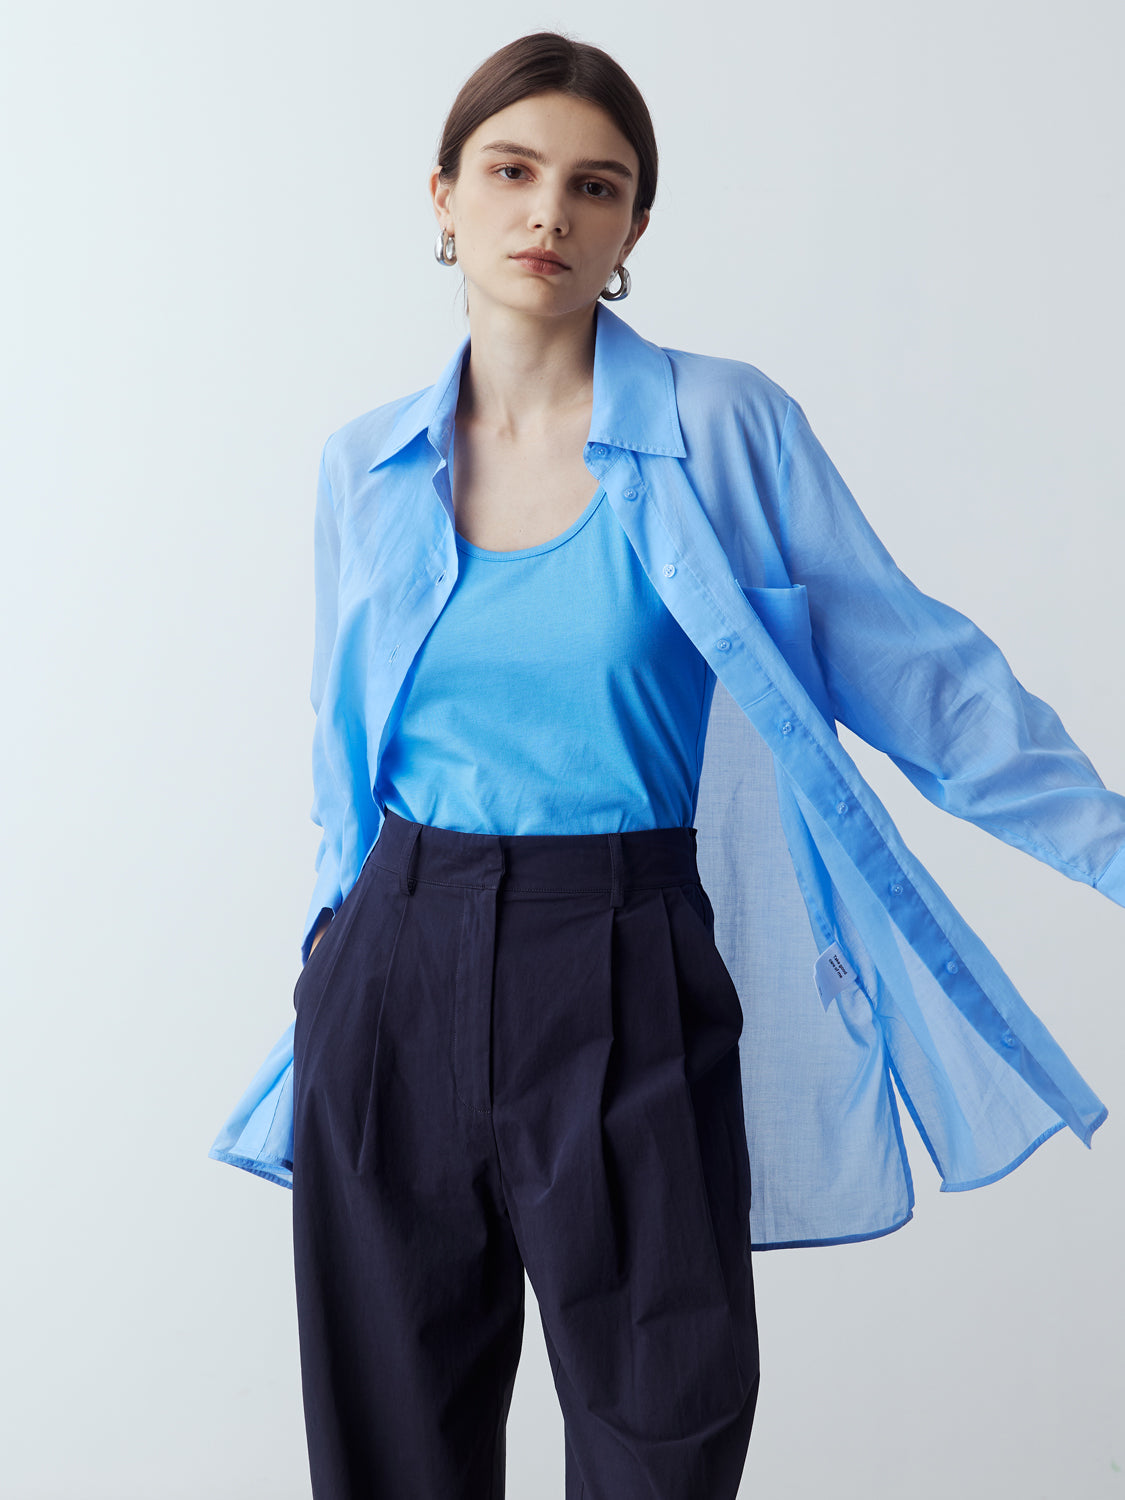 Model is wearing the Sheer Long Sleeve Shirt in Light Blue, which comes with a straight hem, front placket with buttons and a left breast pocket. Worn with the Jersey Tank in Light Blue, the Cotton Tailored Trousers in Navy and metallic silver heels.